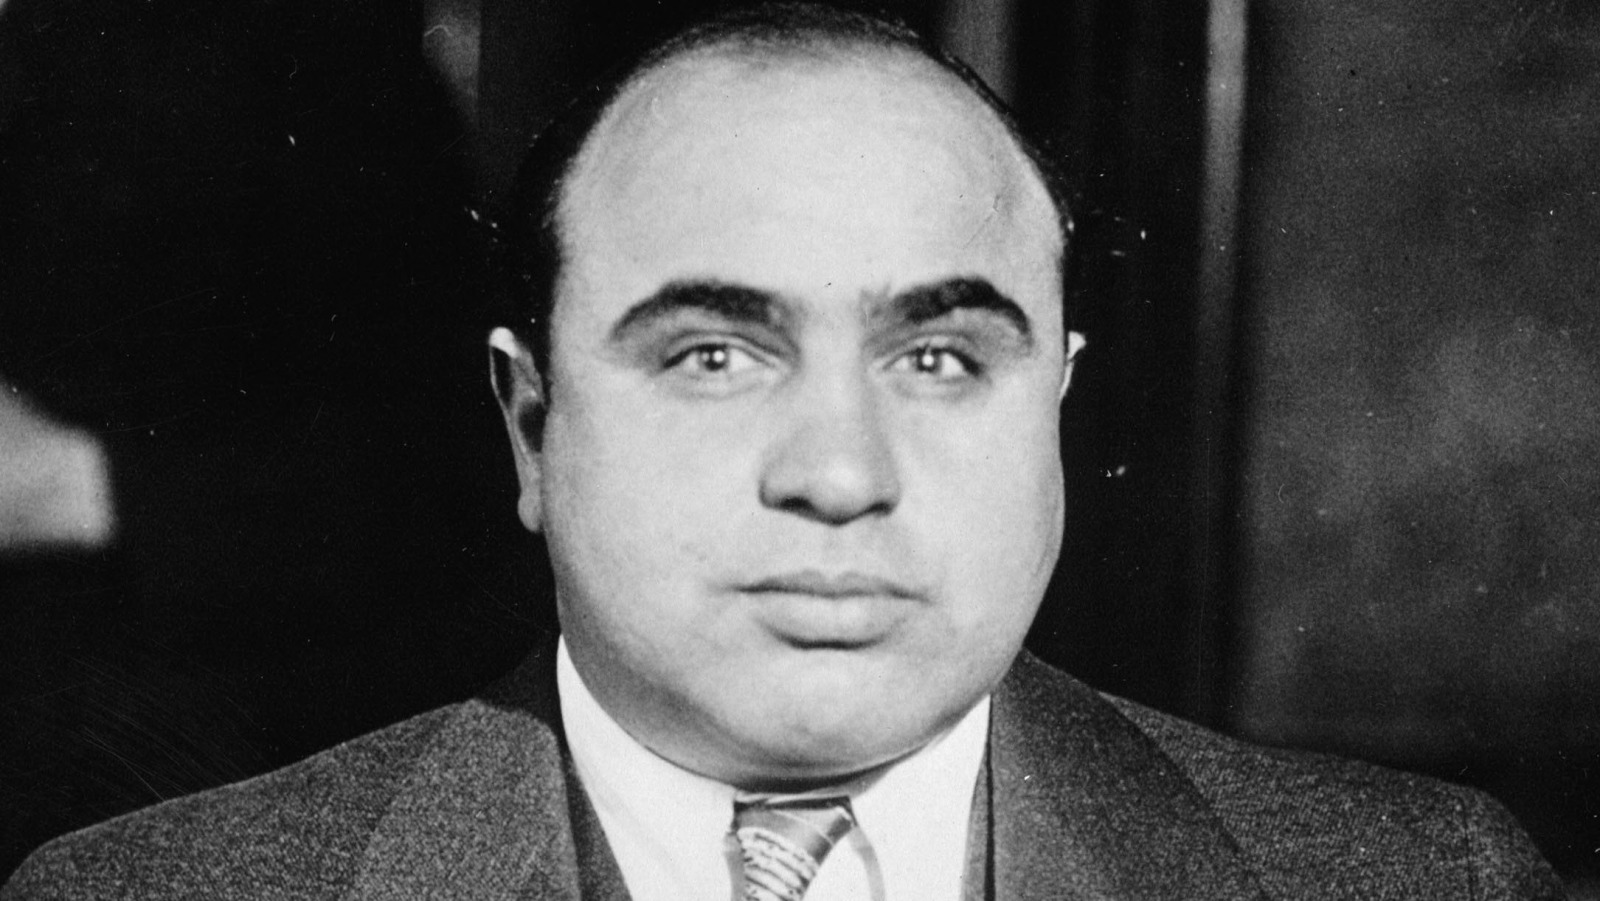 What Al Capone's Final Days Looked Like